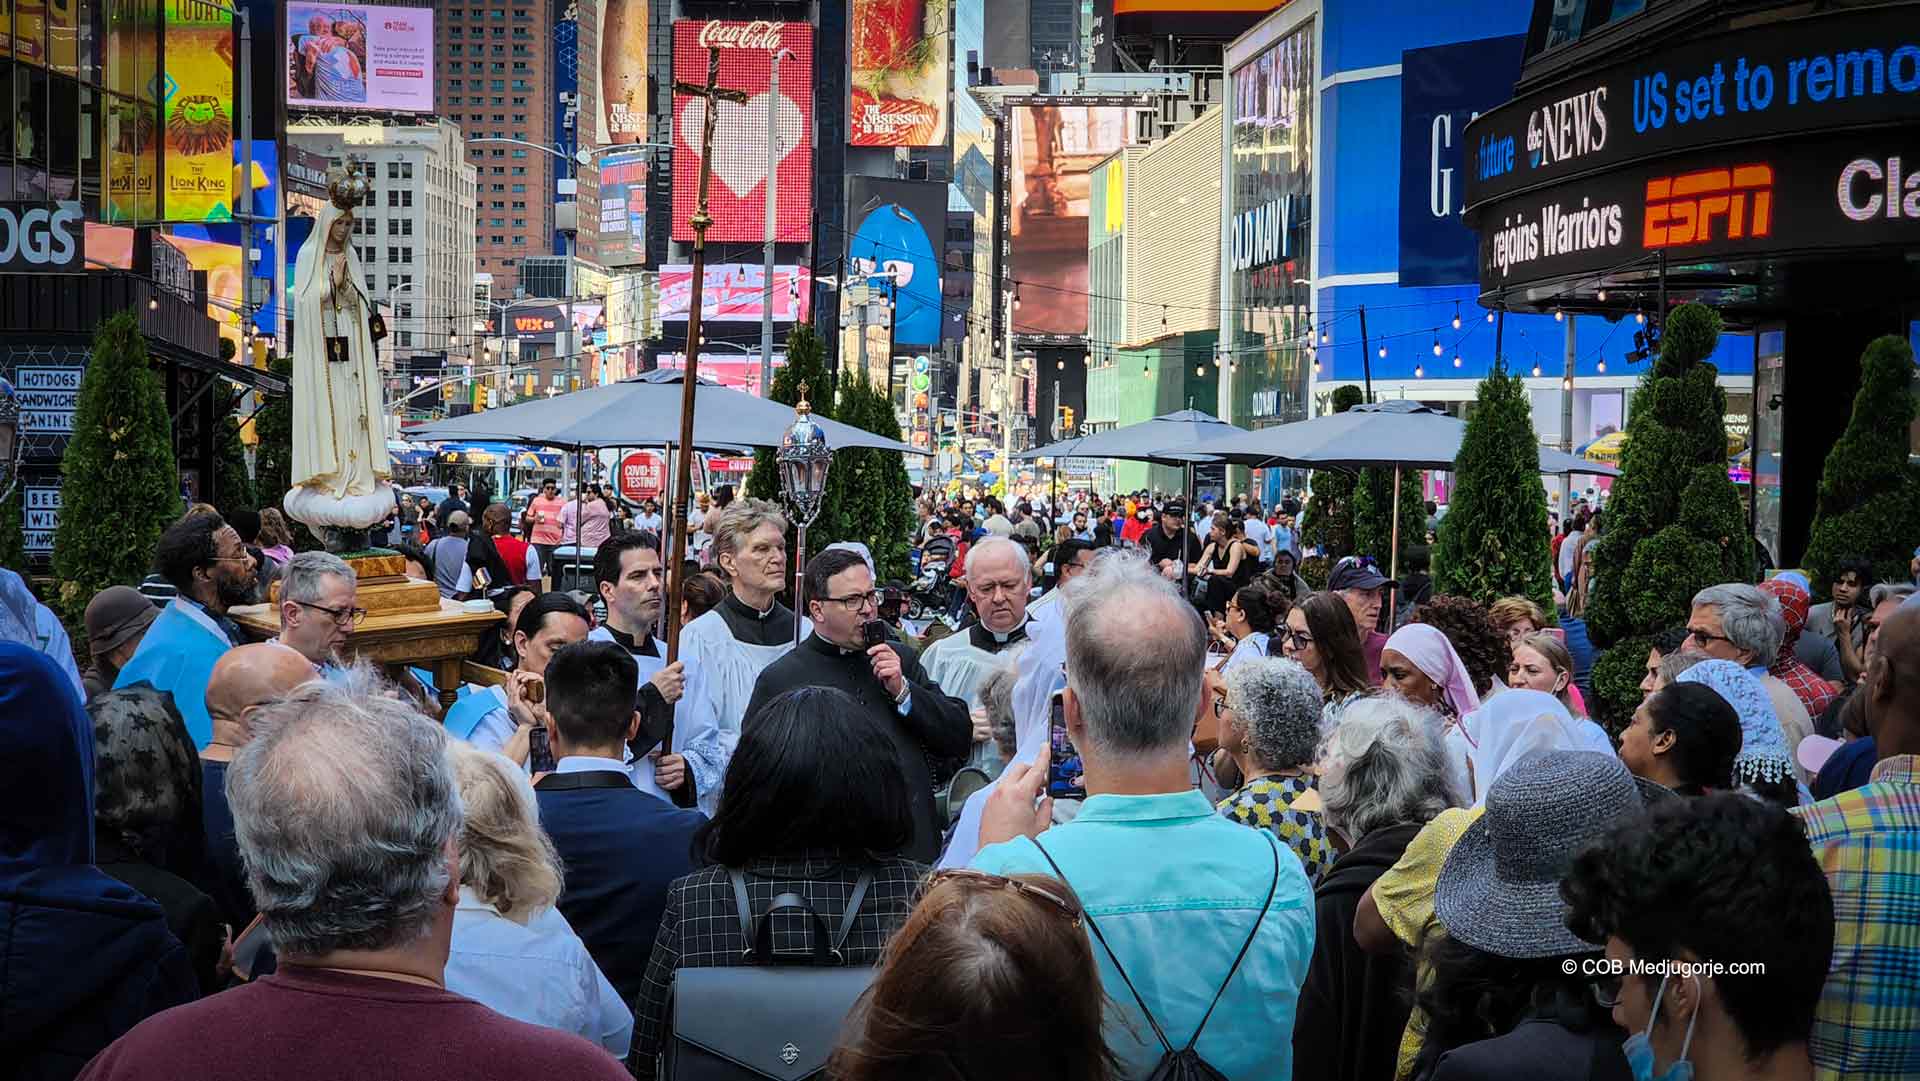 Update: The May 15, 2022, Rosary Rally at Times Square